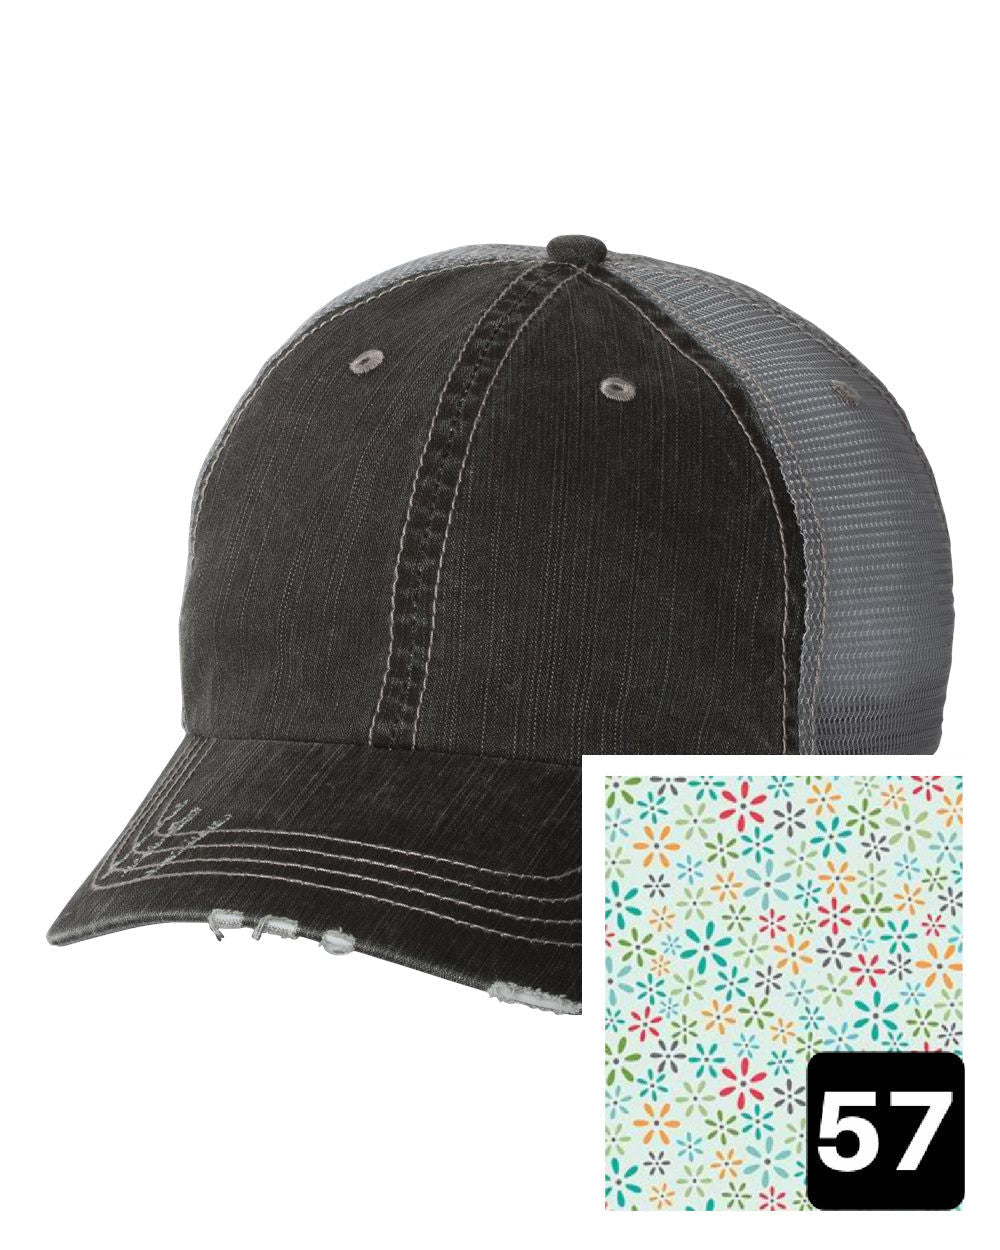 gray distressed trucker hat with white daisy on green fabric state of Maine